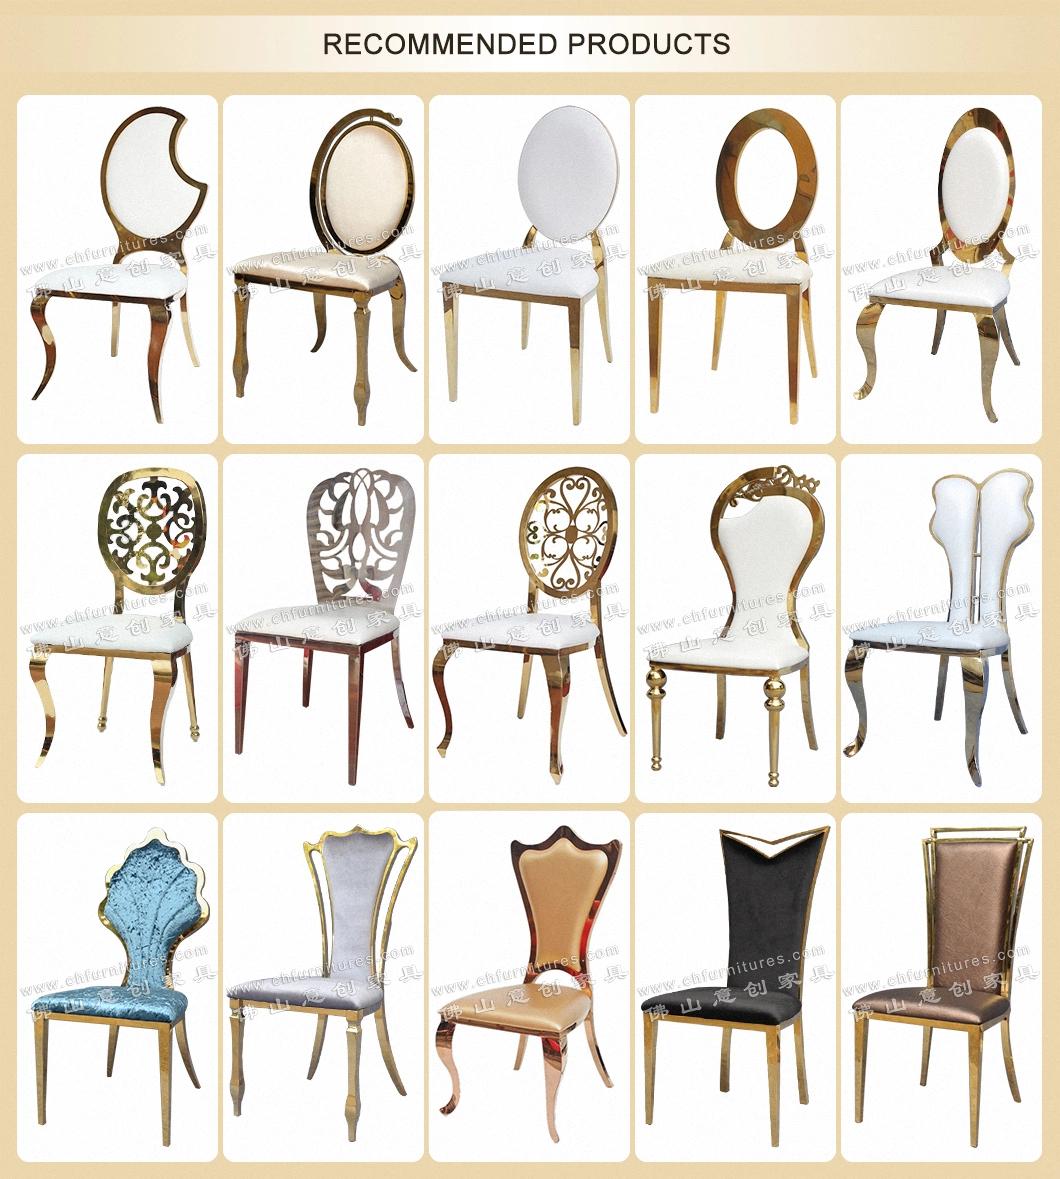 Ycx-Ss57 Foshan Modern Gold Tube White Dining Stainless Steel Wedding Chairs